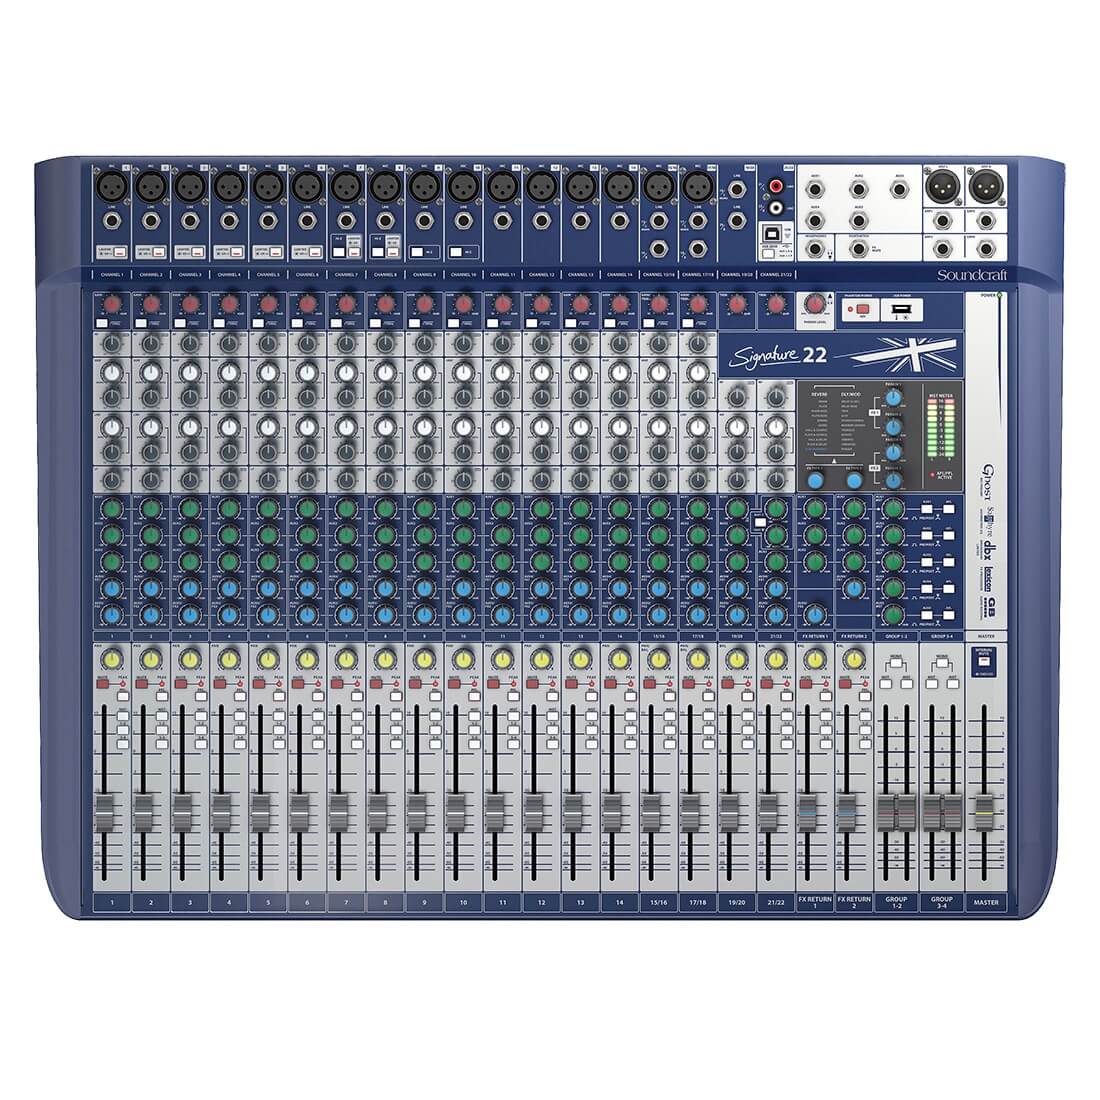 Soundcraft Signature 22 - 22-channel Analog Mixer with Lexicon Effects, top